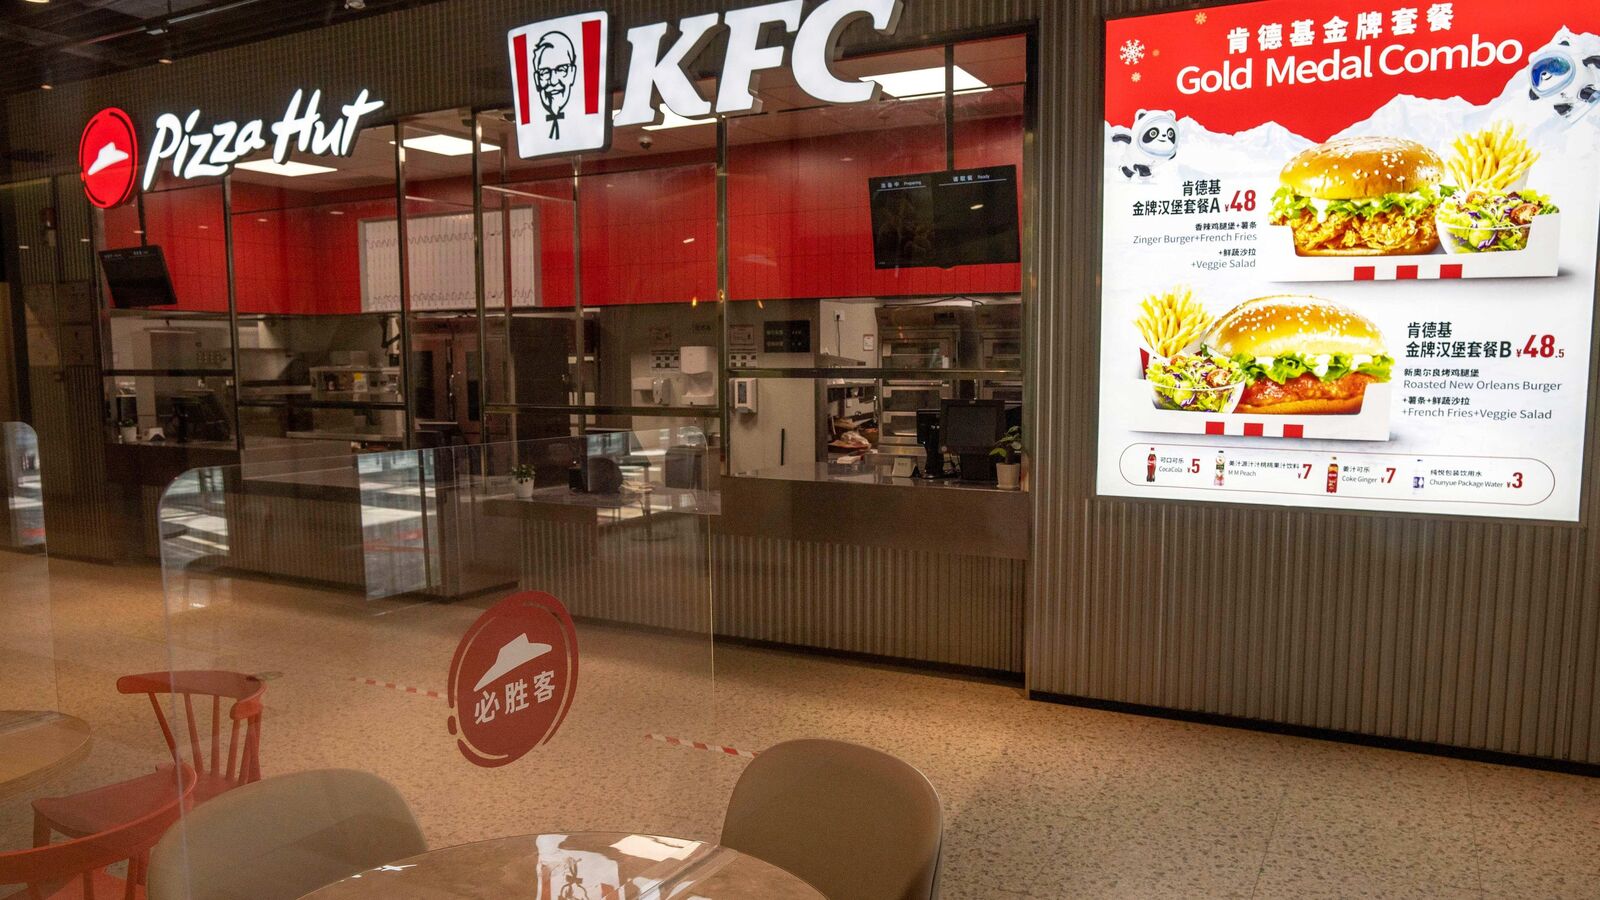 KFC and Pizza Hut operator Sapphire Foods share price in focus on stock split of 1 share into 5 shares